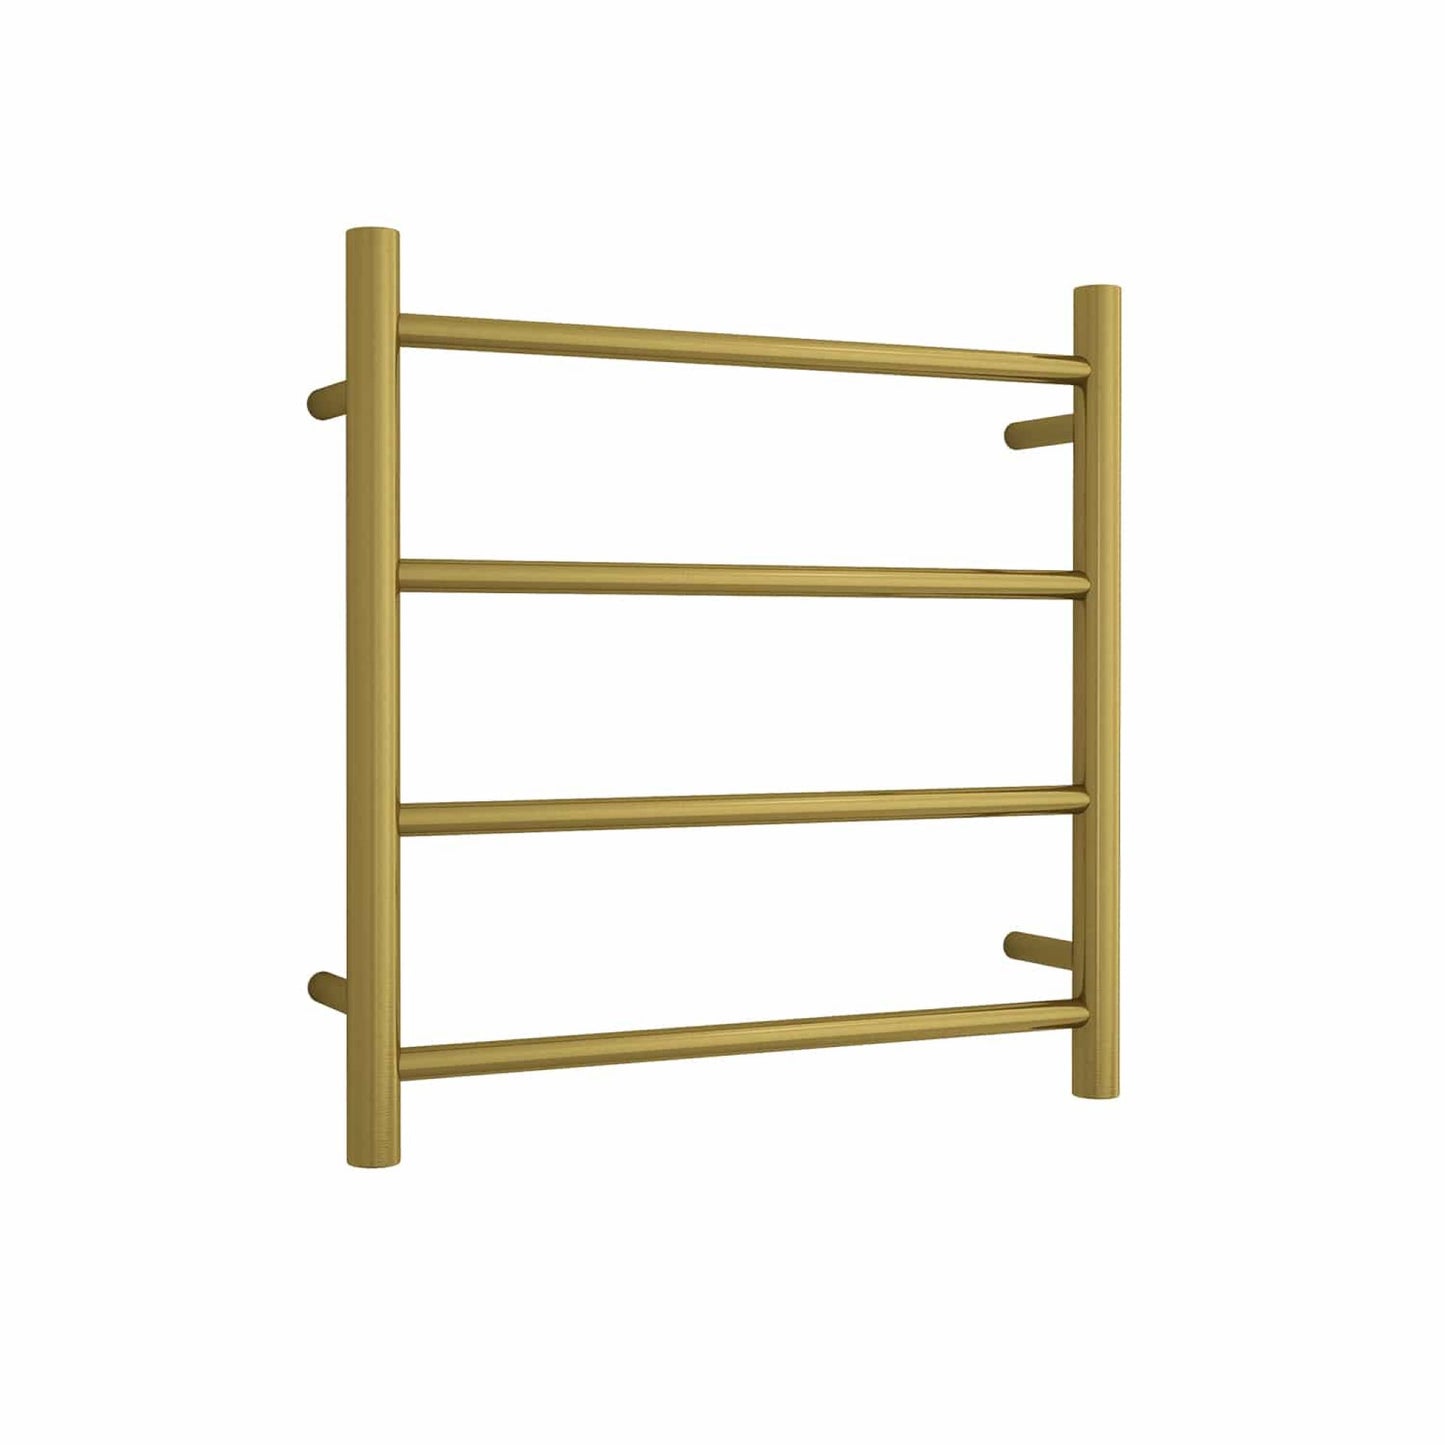 THERMORAIL - SR25MBG Brushed Gold Round Ladder Heated Towel Rail